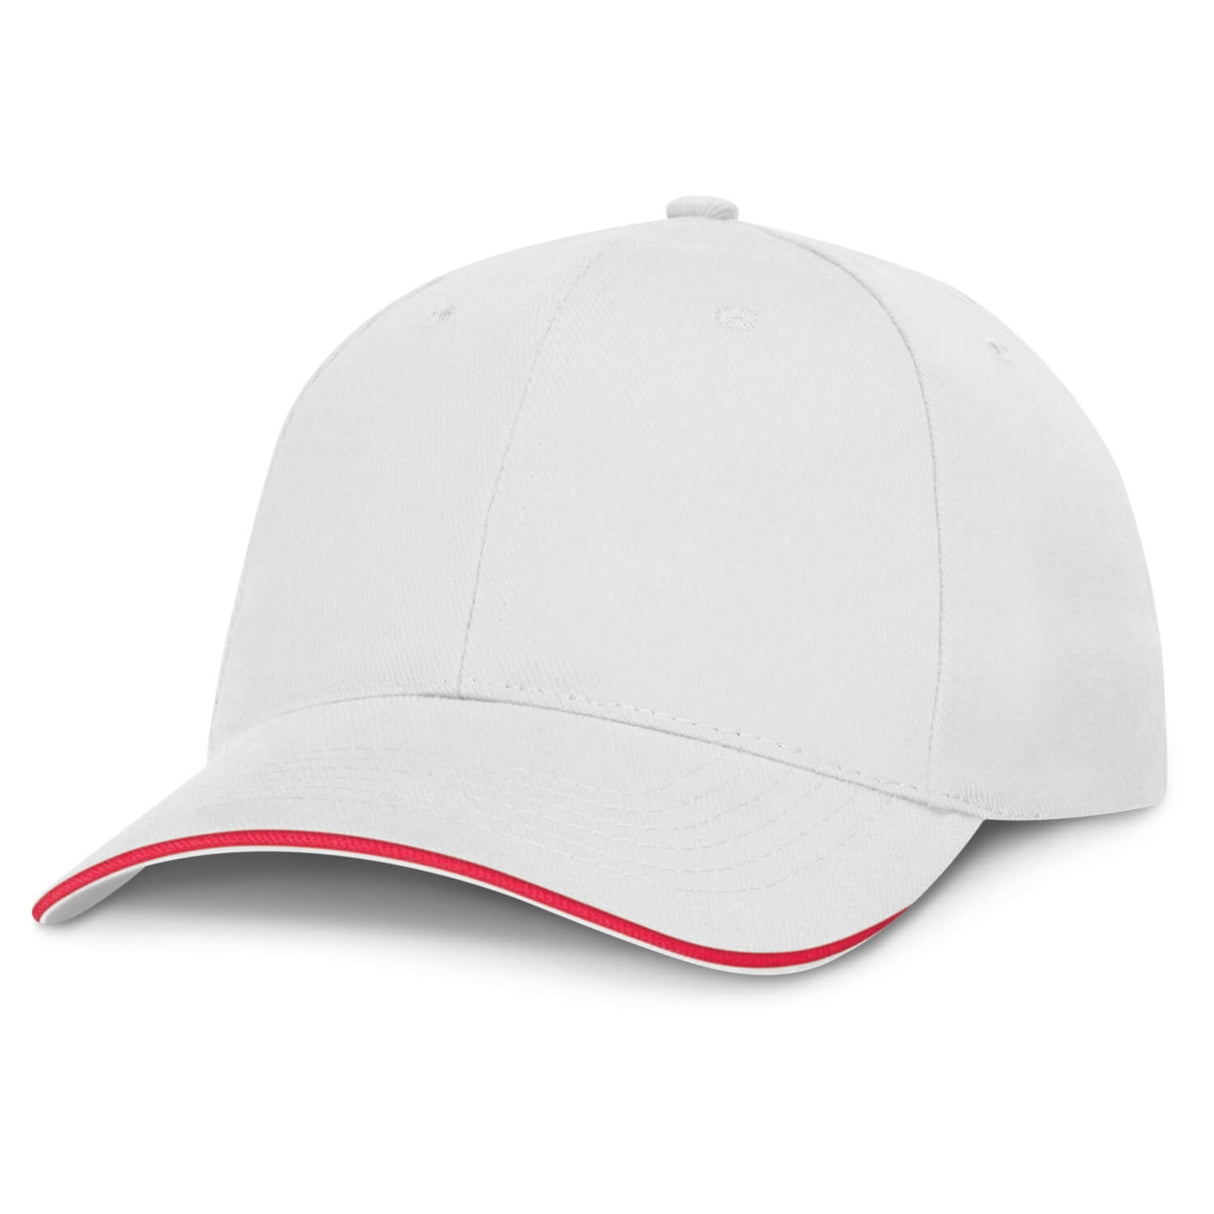 Swift 6 Panel Cap - Embroidered